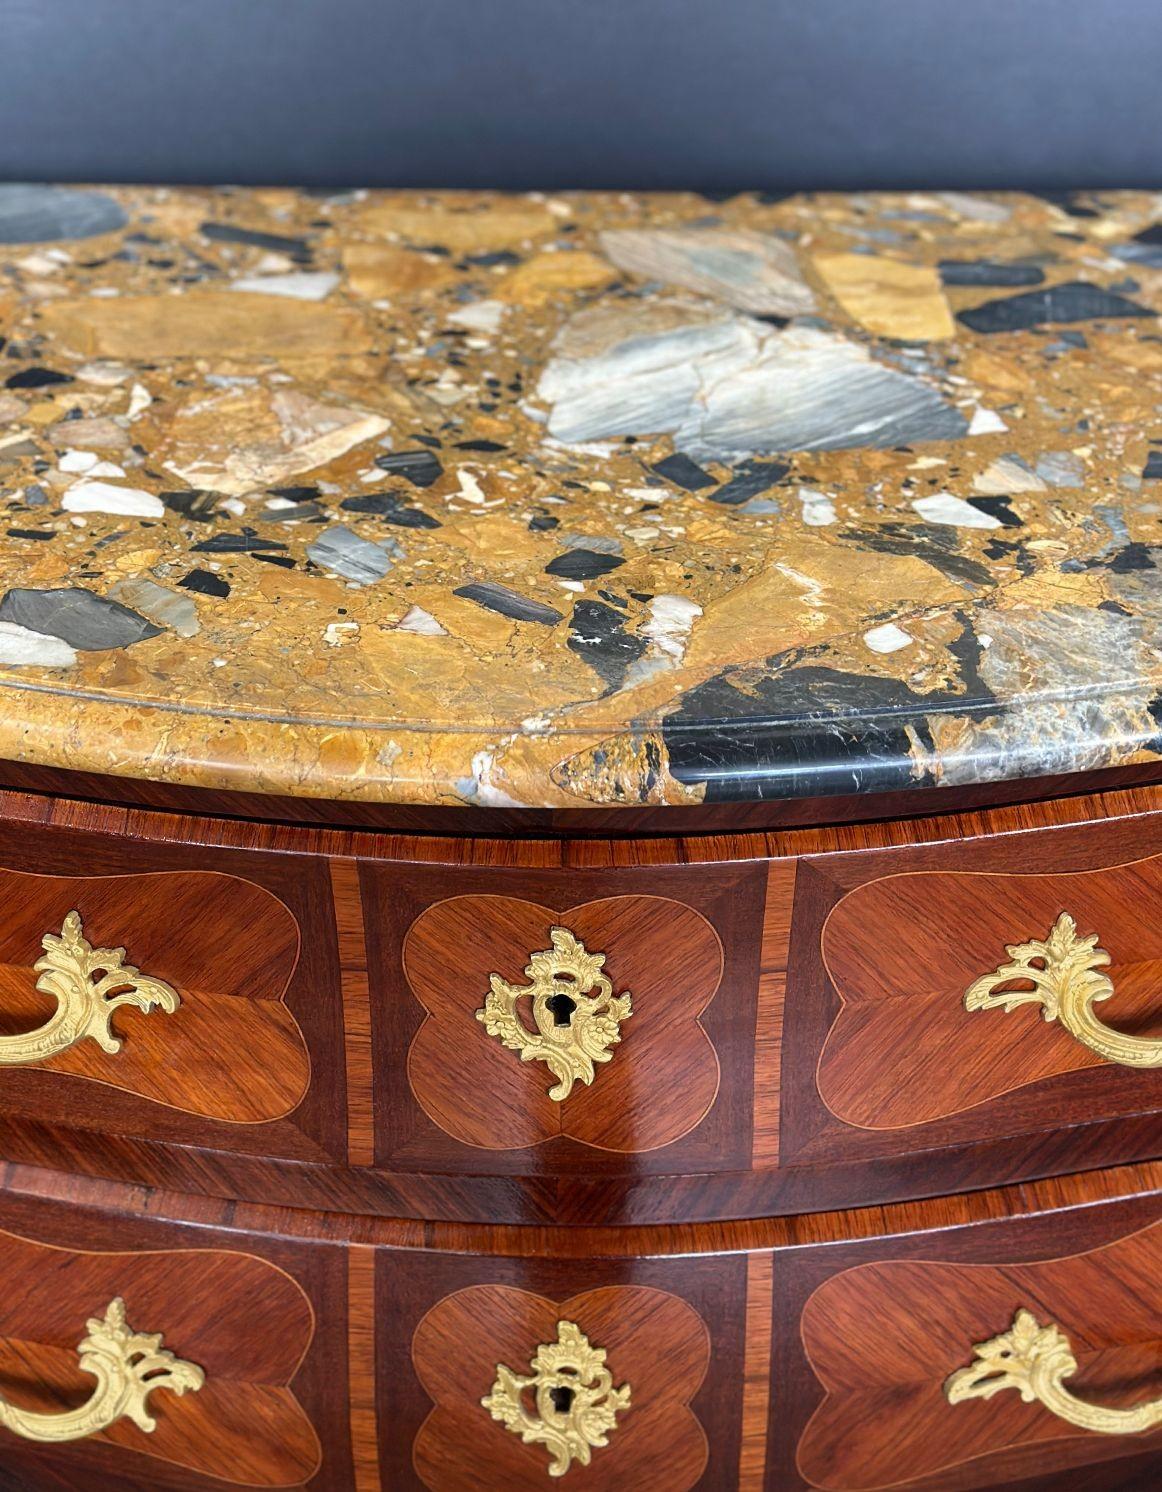 An elegant kingwood and rosewood Louis XV Bombé commode made in France in the late 19th Century, featuring a Breche d' Alep marble top over two drawers with bronze mounts handles and decorations. The piece has beautiful parquetry in each drawer as